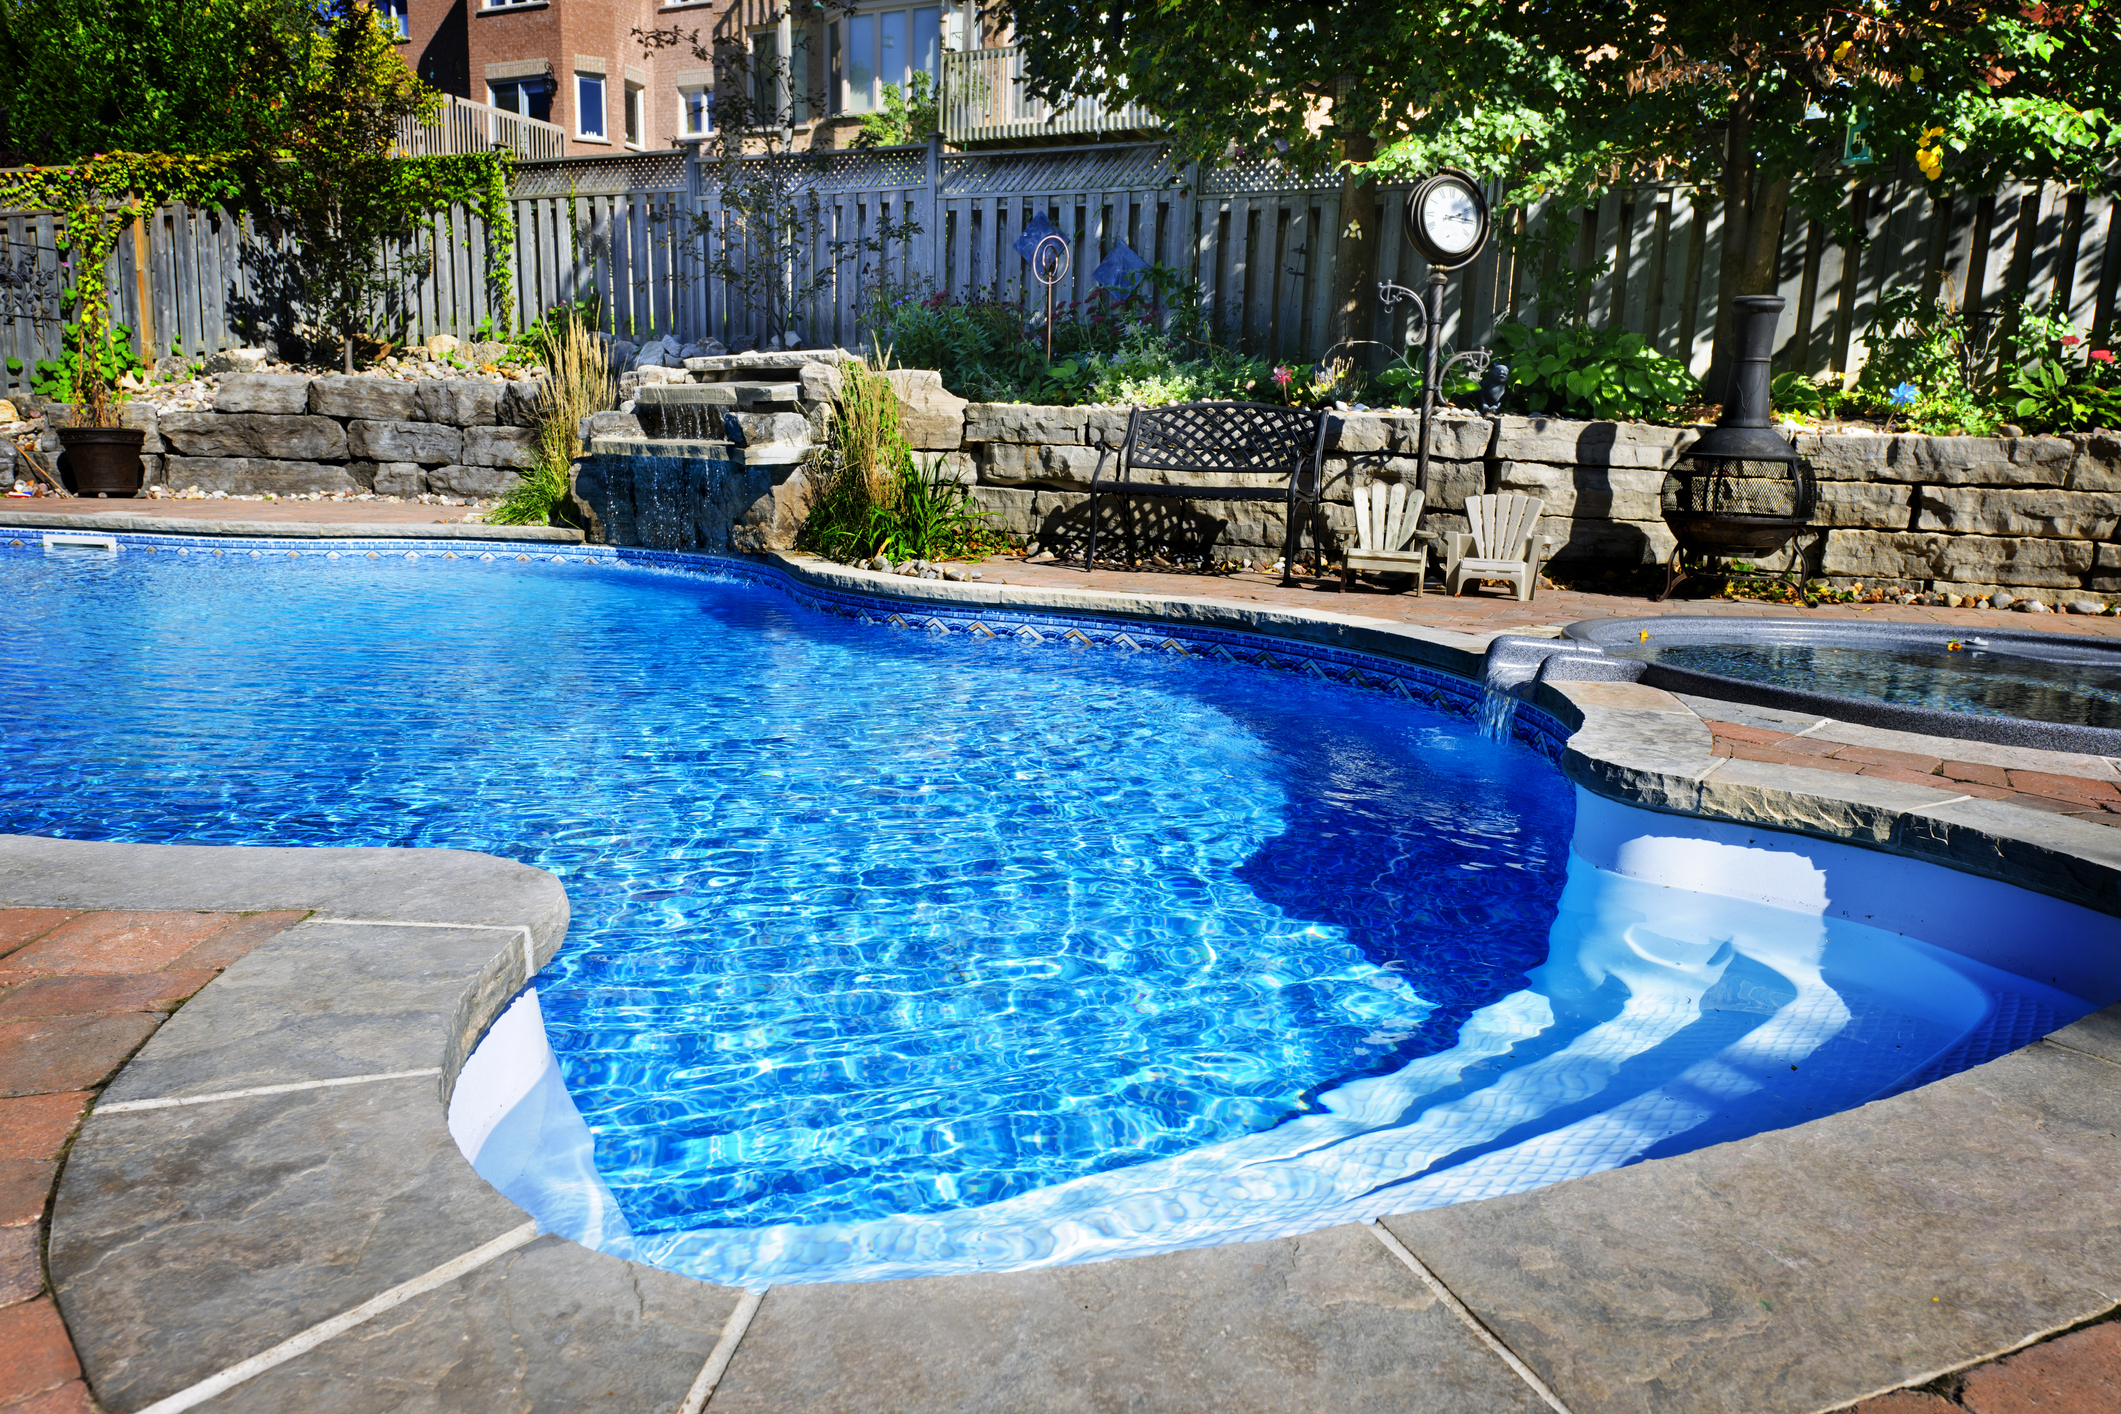 Get Your Pool Ready for Warmer Weather